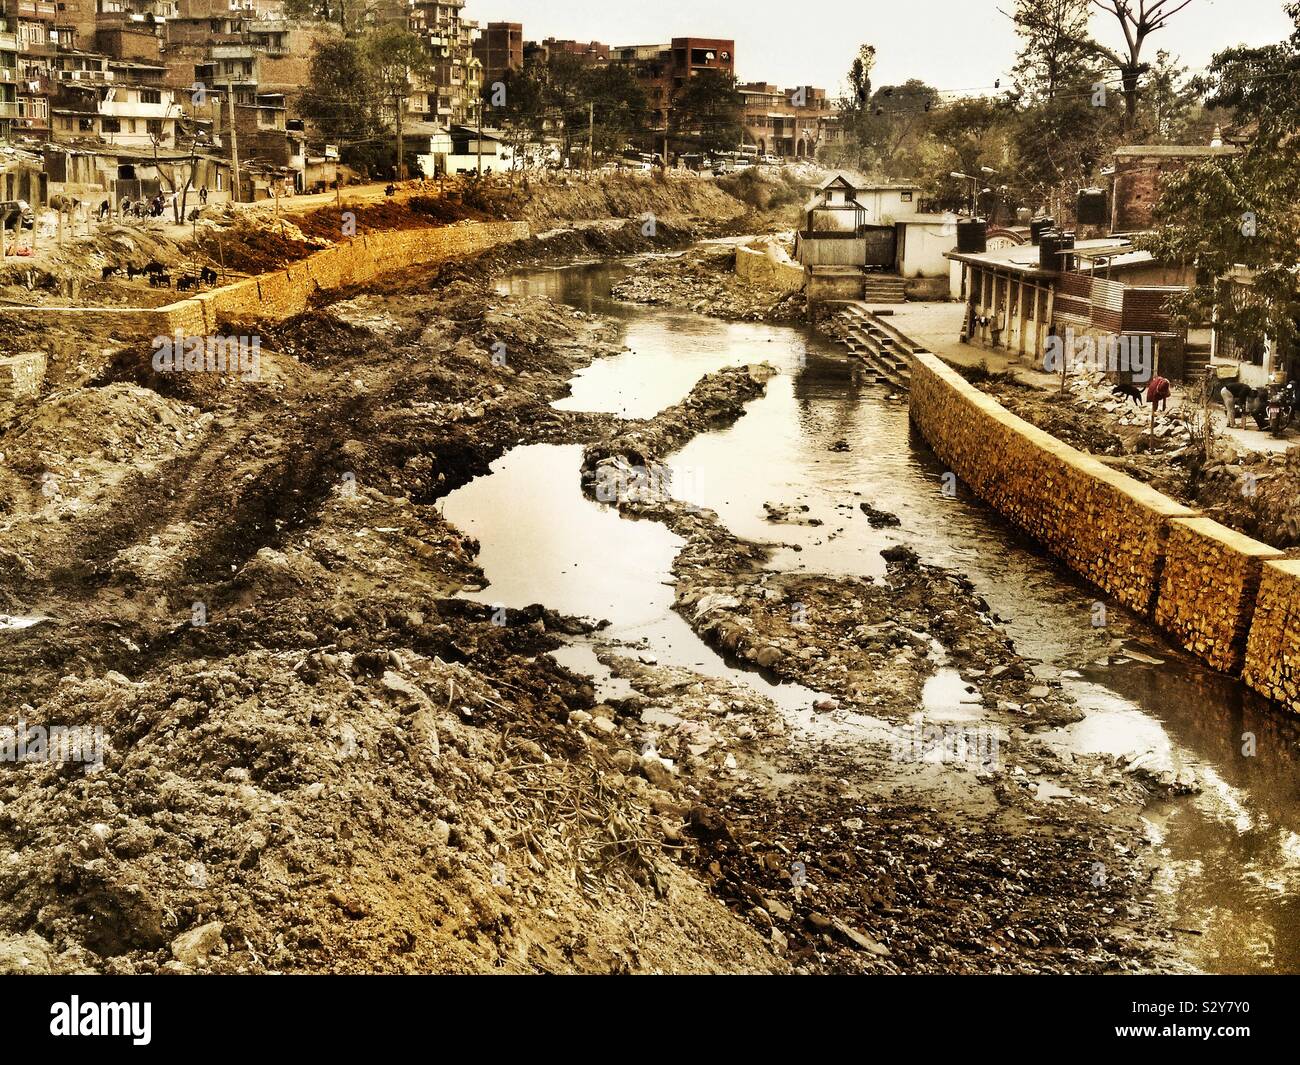 Muddy river bed in Kathmandu where they choose to fix the walls in monsoon season. Stock Photo